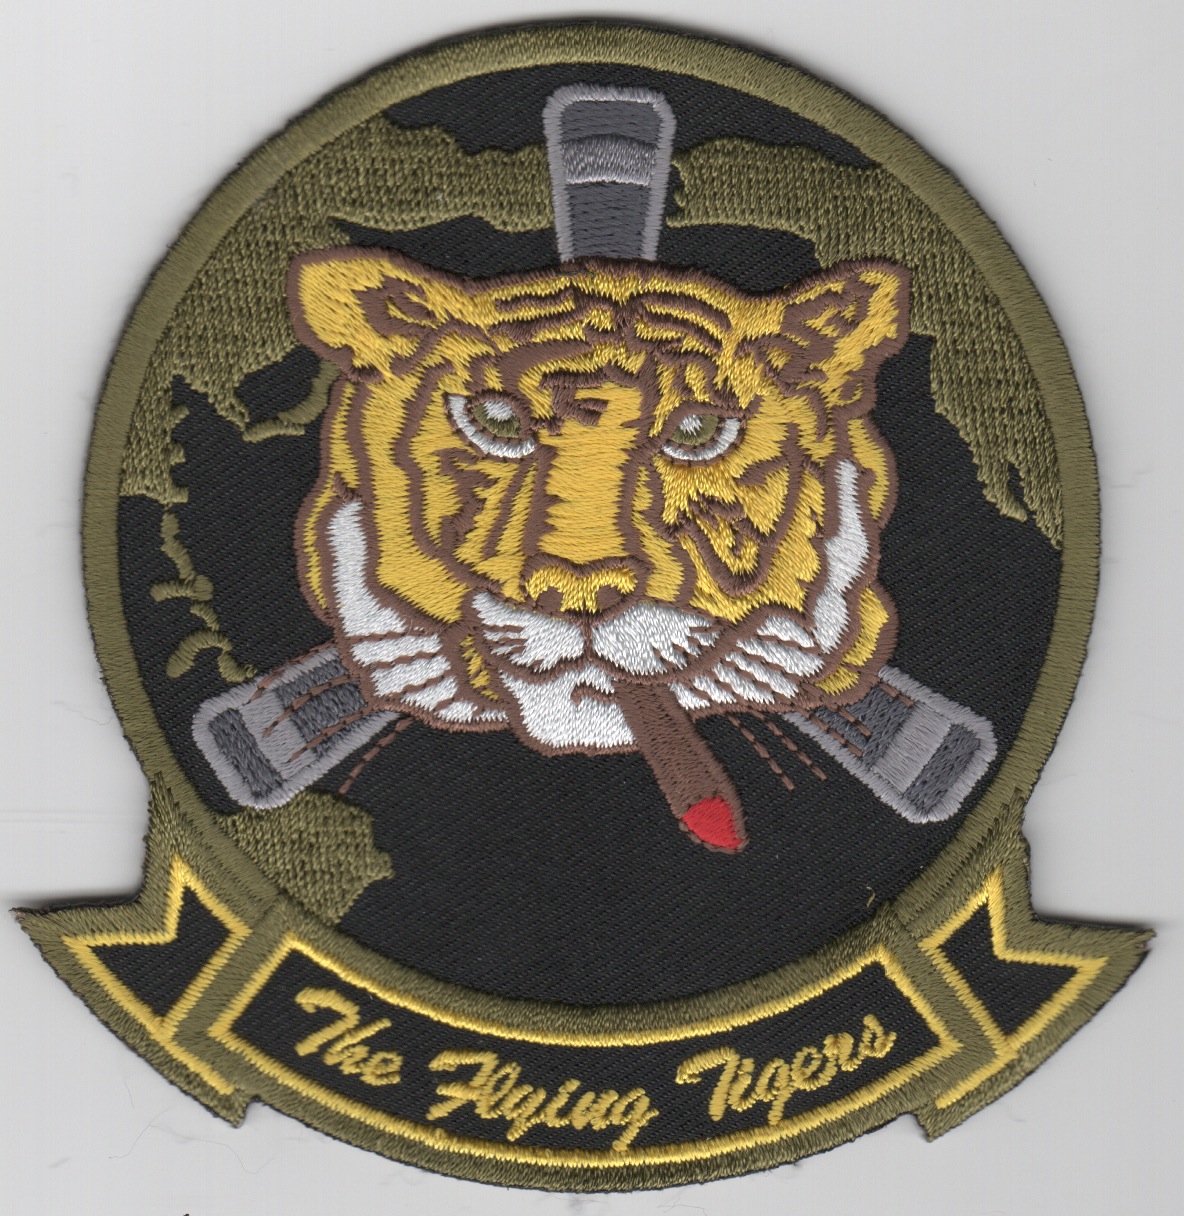 VMM-265 'Flying Tigers' Heritage Patch